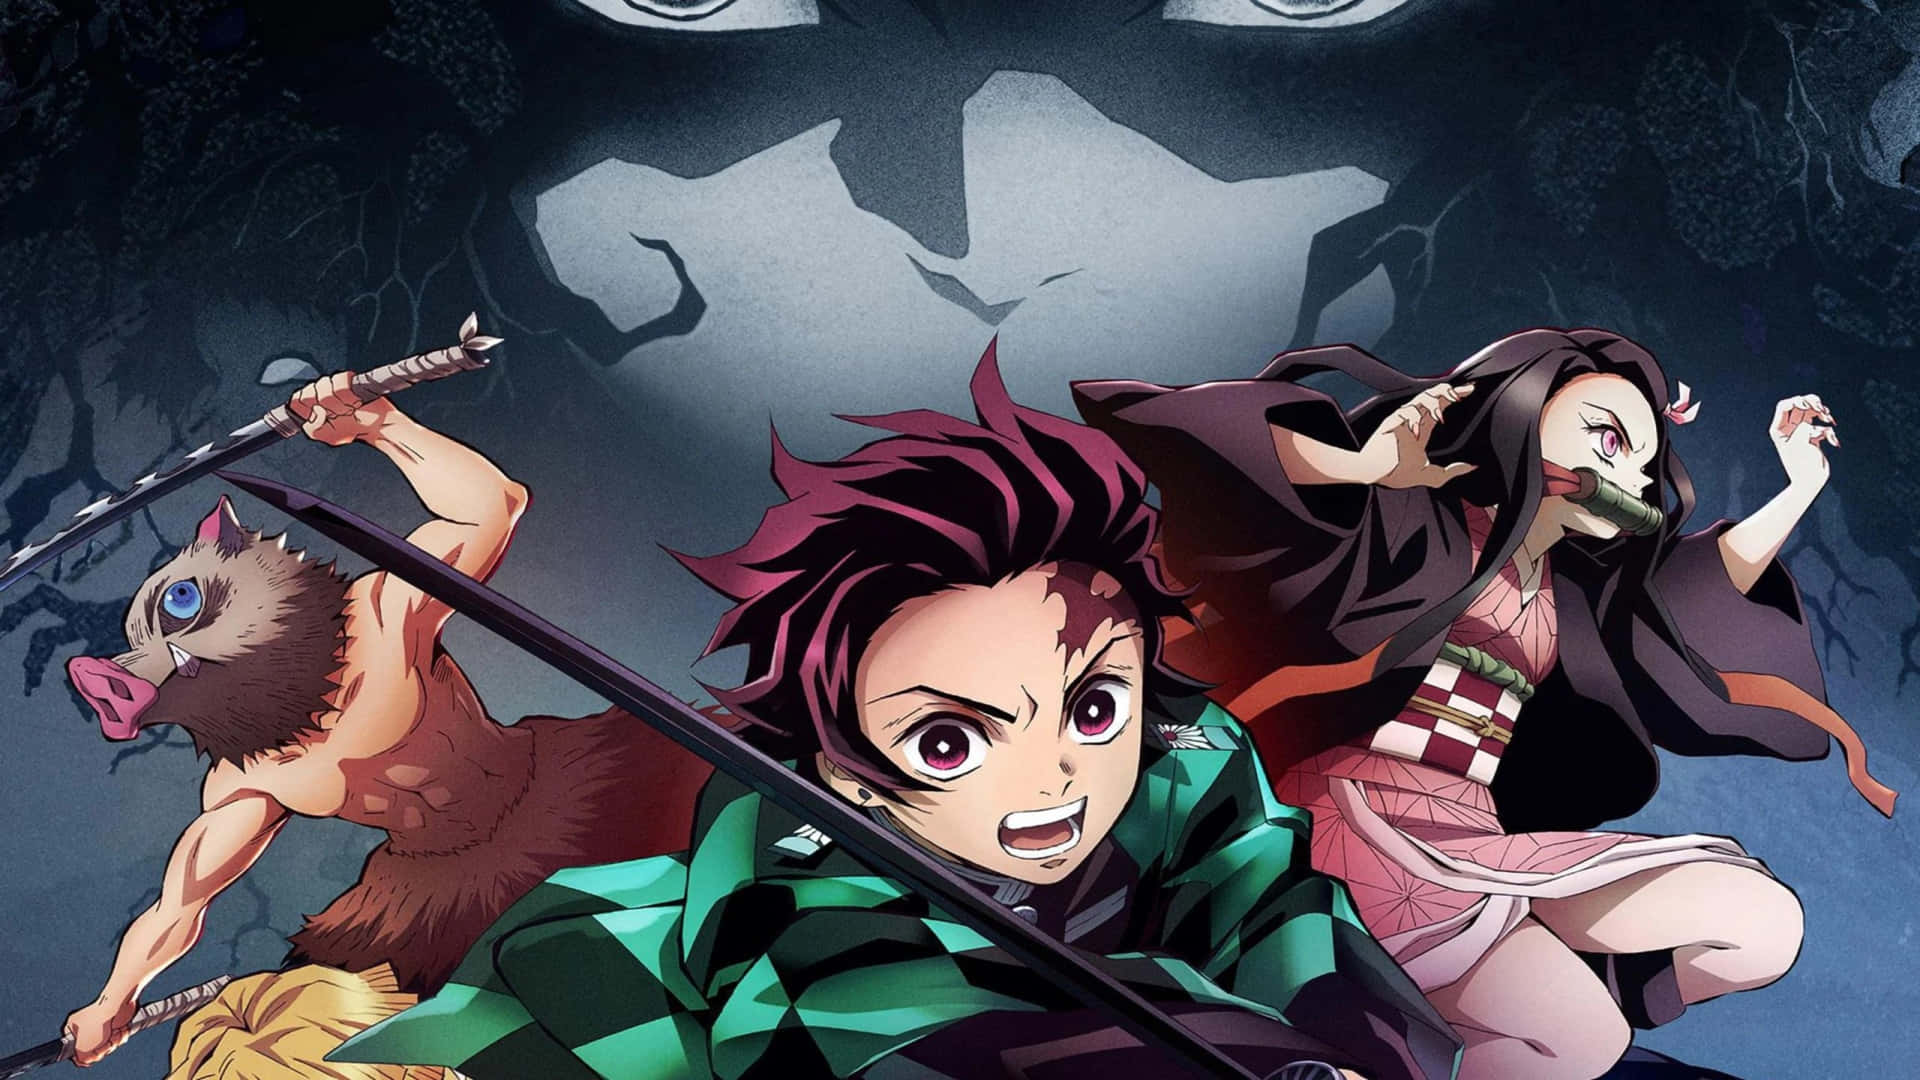 Join Tanjiro and the Demon Slayer Corps to vanquish the evil threatening humanity